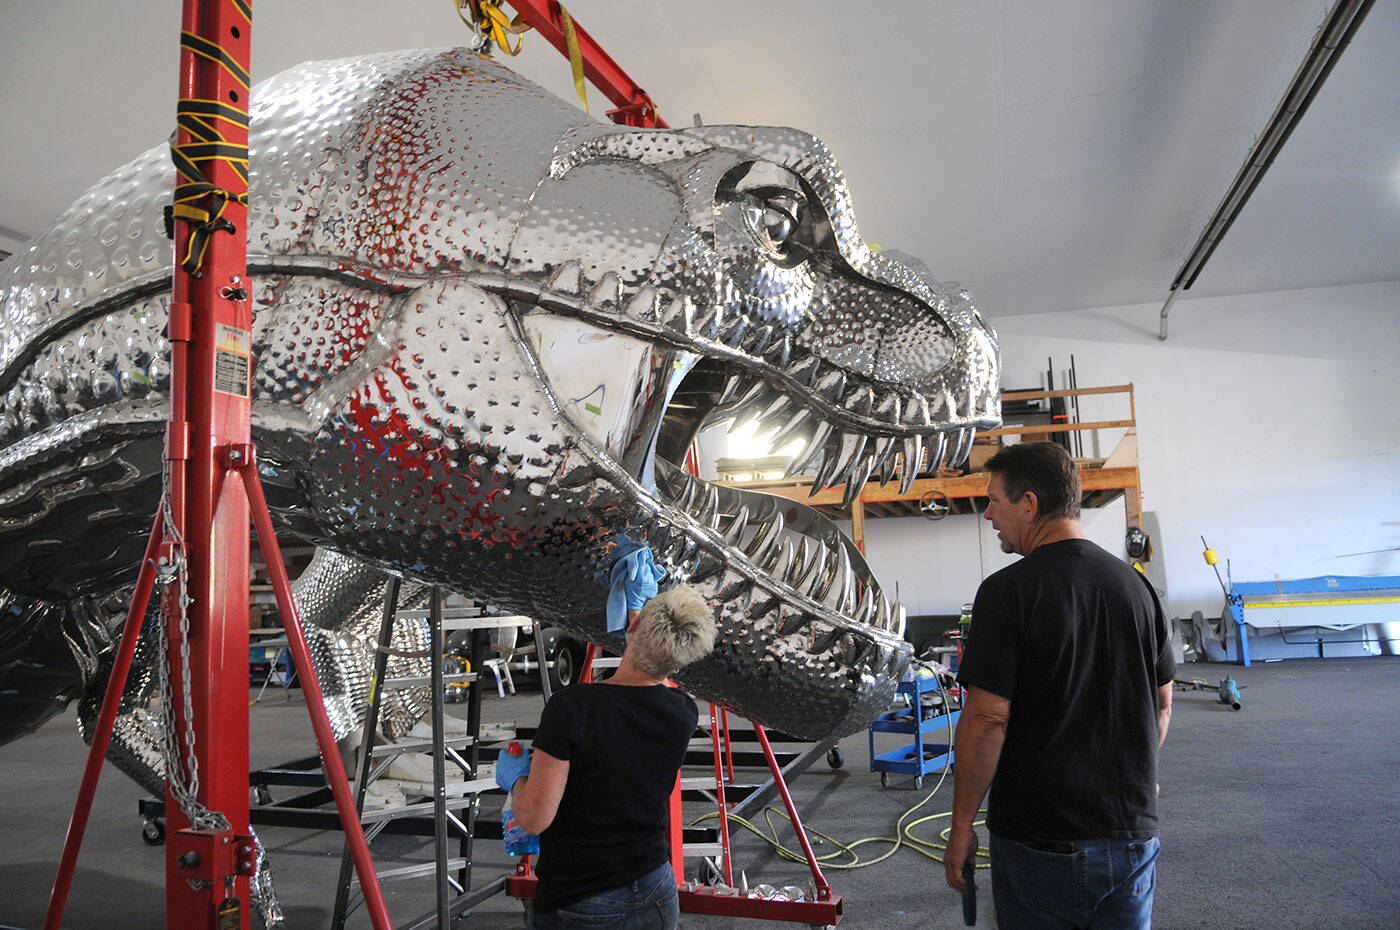 Kevin Stone and wife Michelle were putting the finishing touches on a 17,000-pound, stainless-steel T. rex on Thursday, Sept. 14, 2023, just days before it was to be shipped from Chilliwack to Penticton. (Jenna Hauck/ Chilliwack Progress)